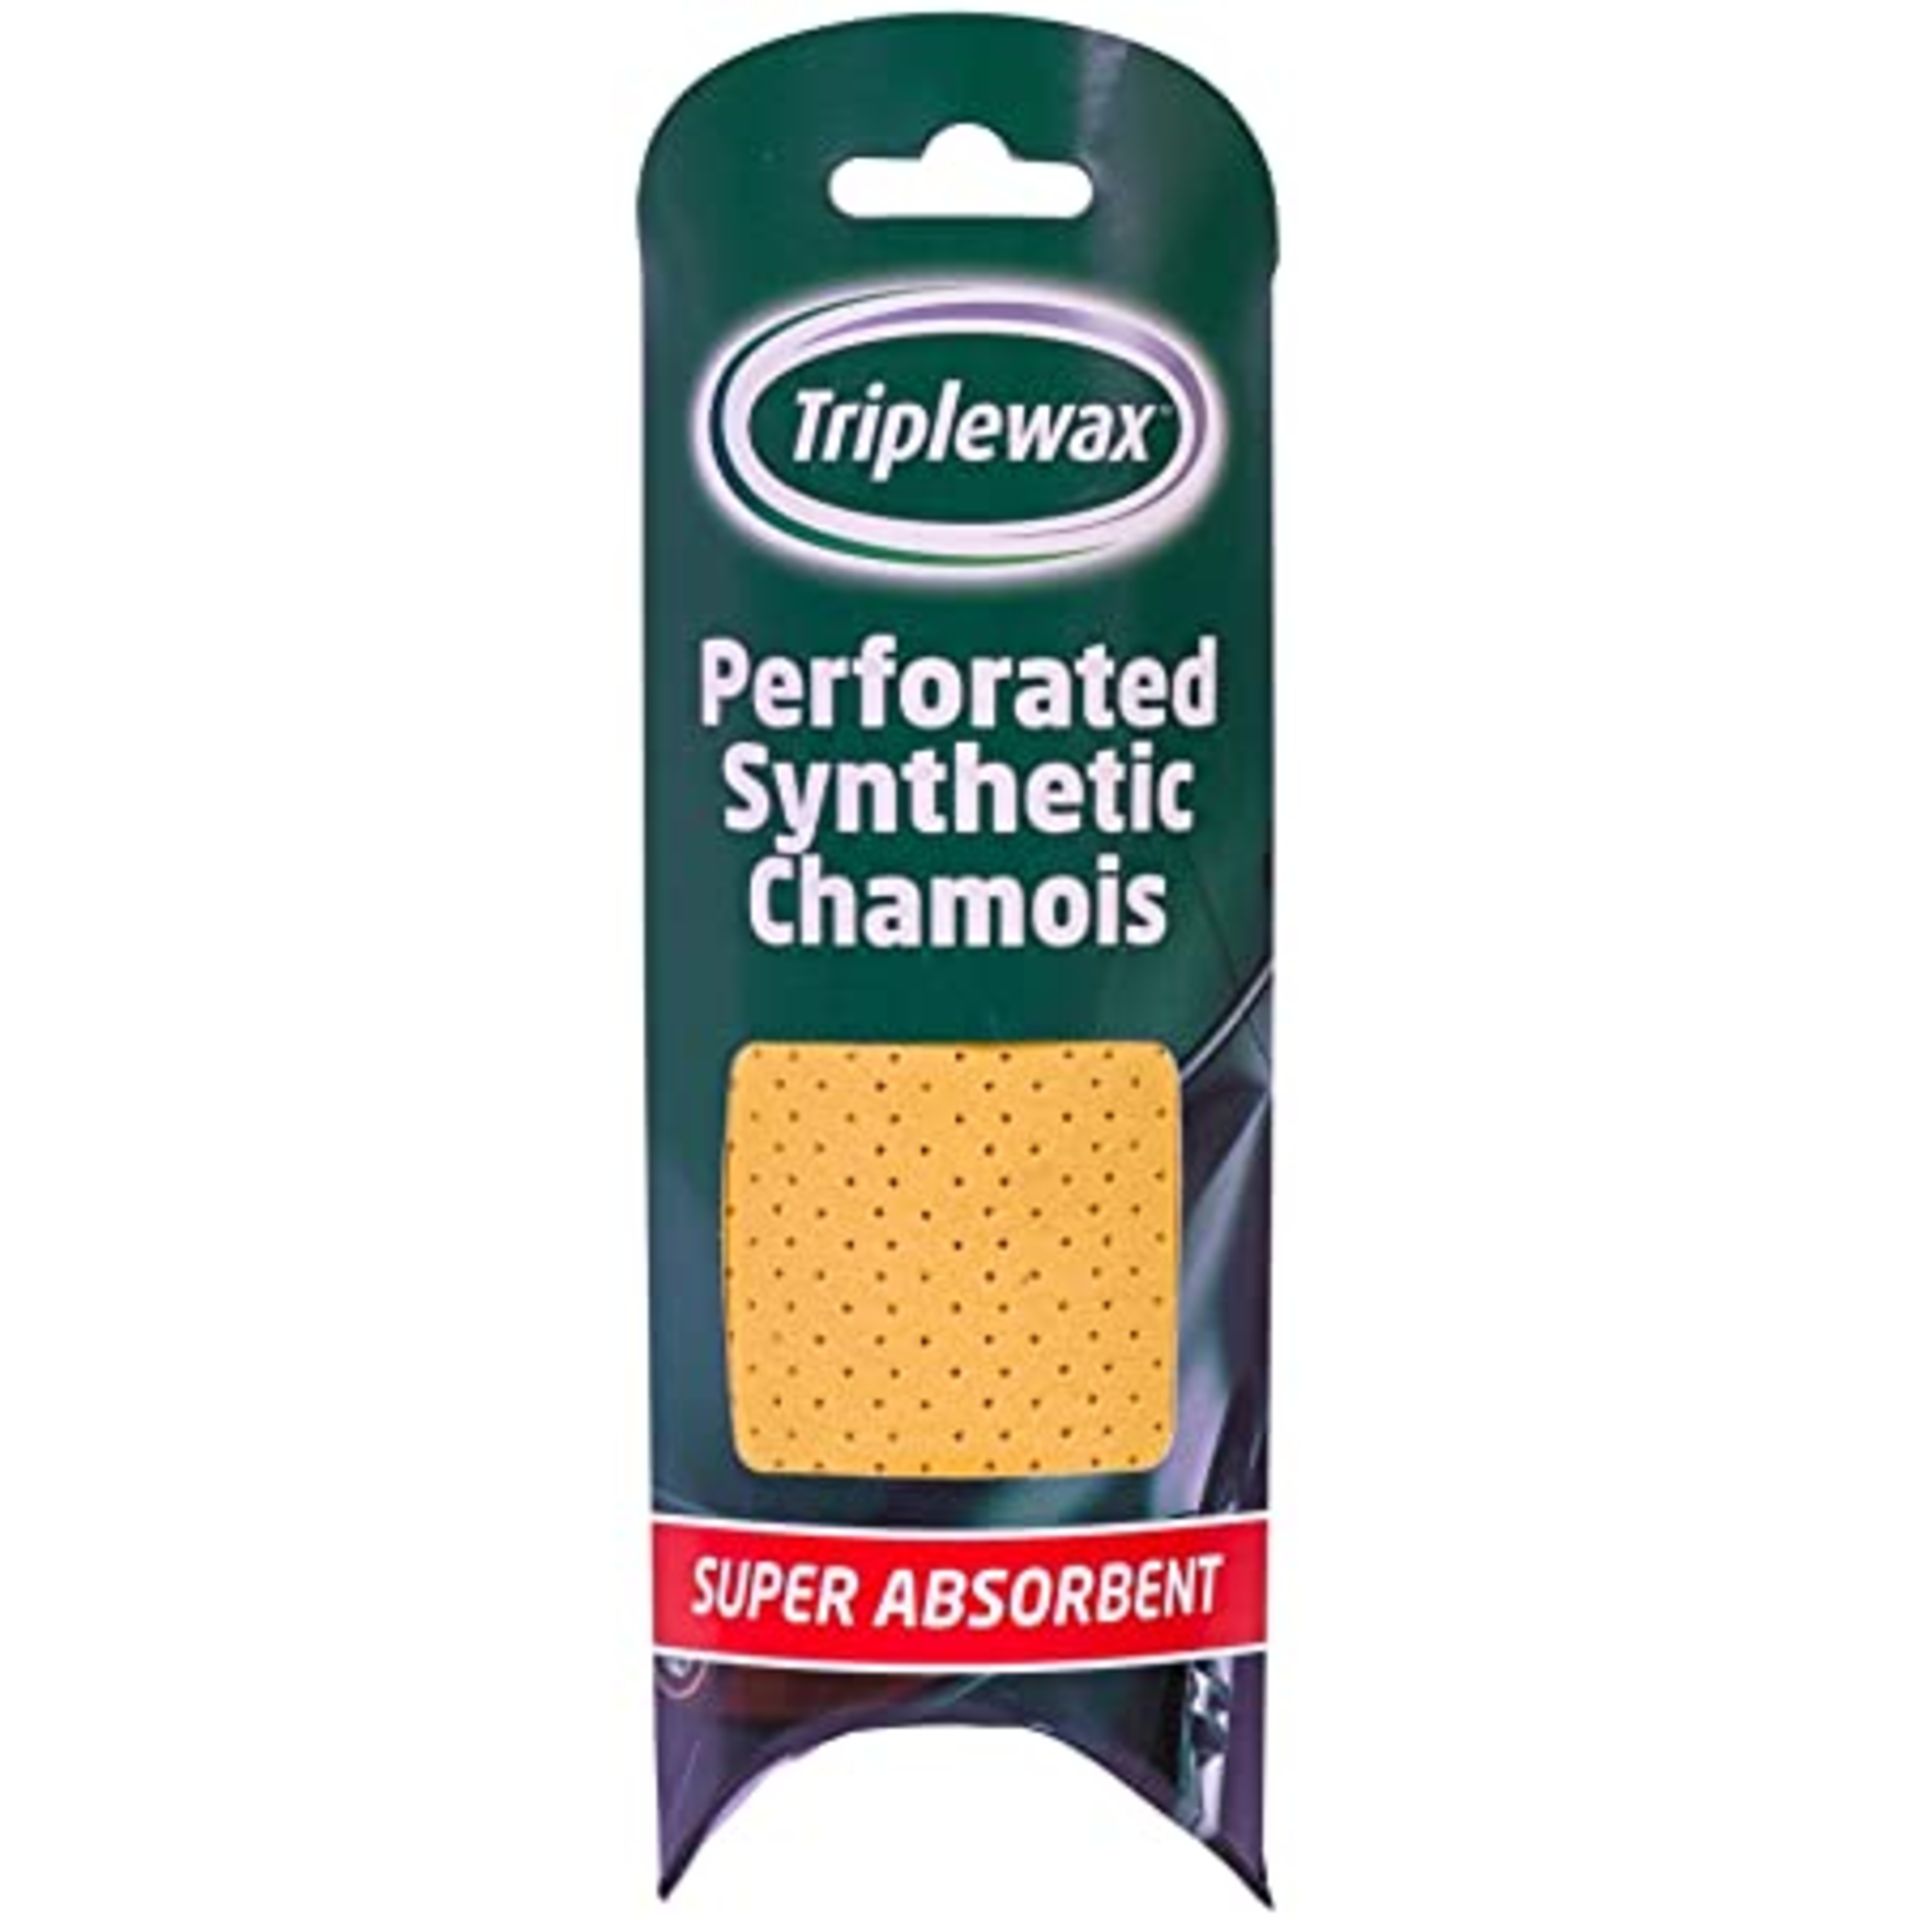 6 x Triplewax Perforated Synthetic Chamois